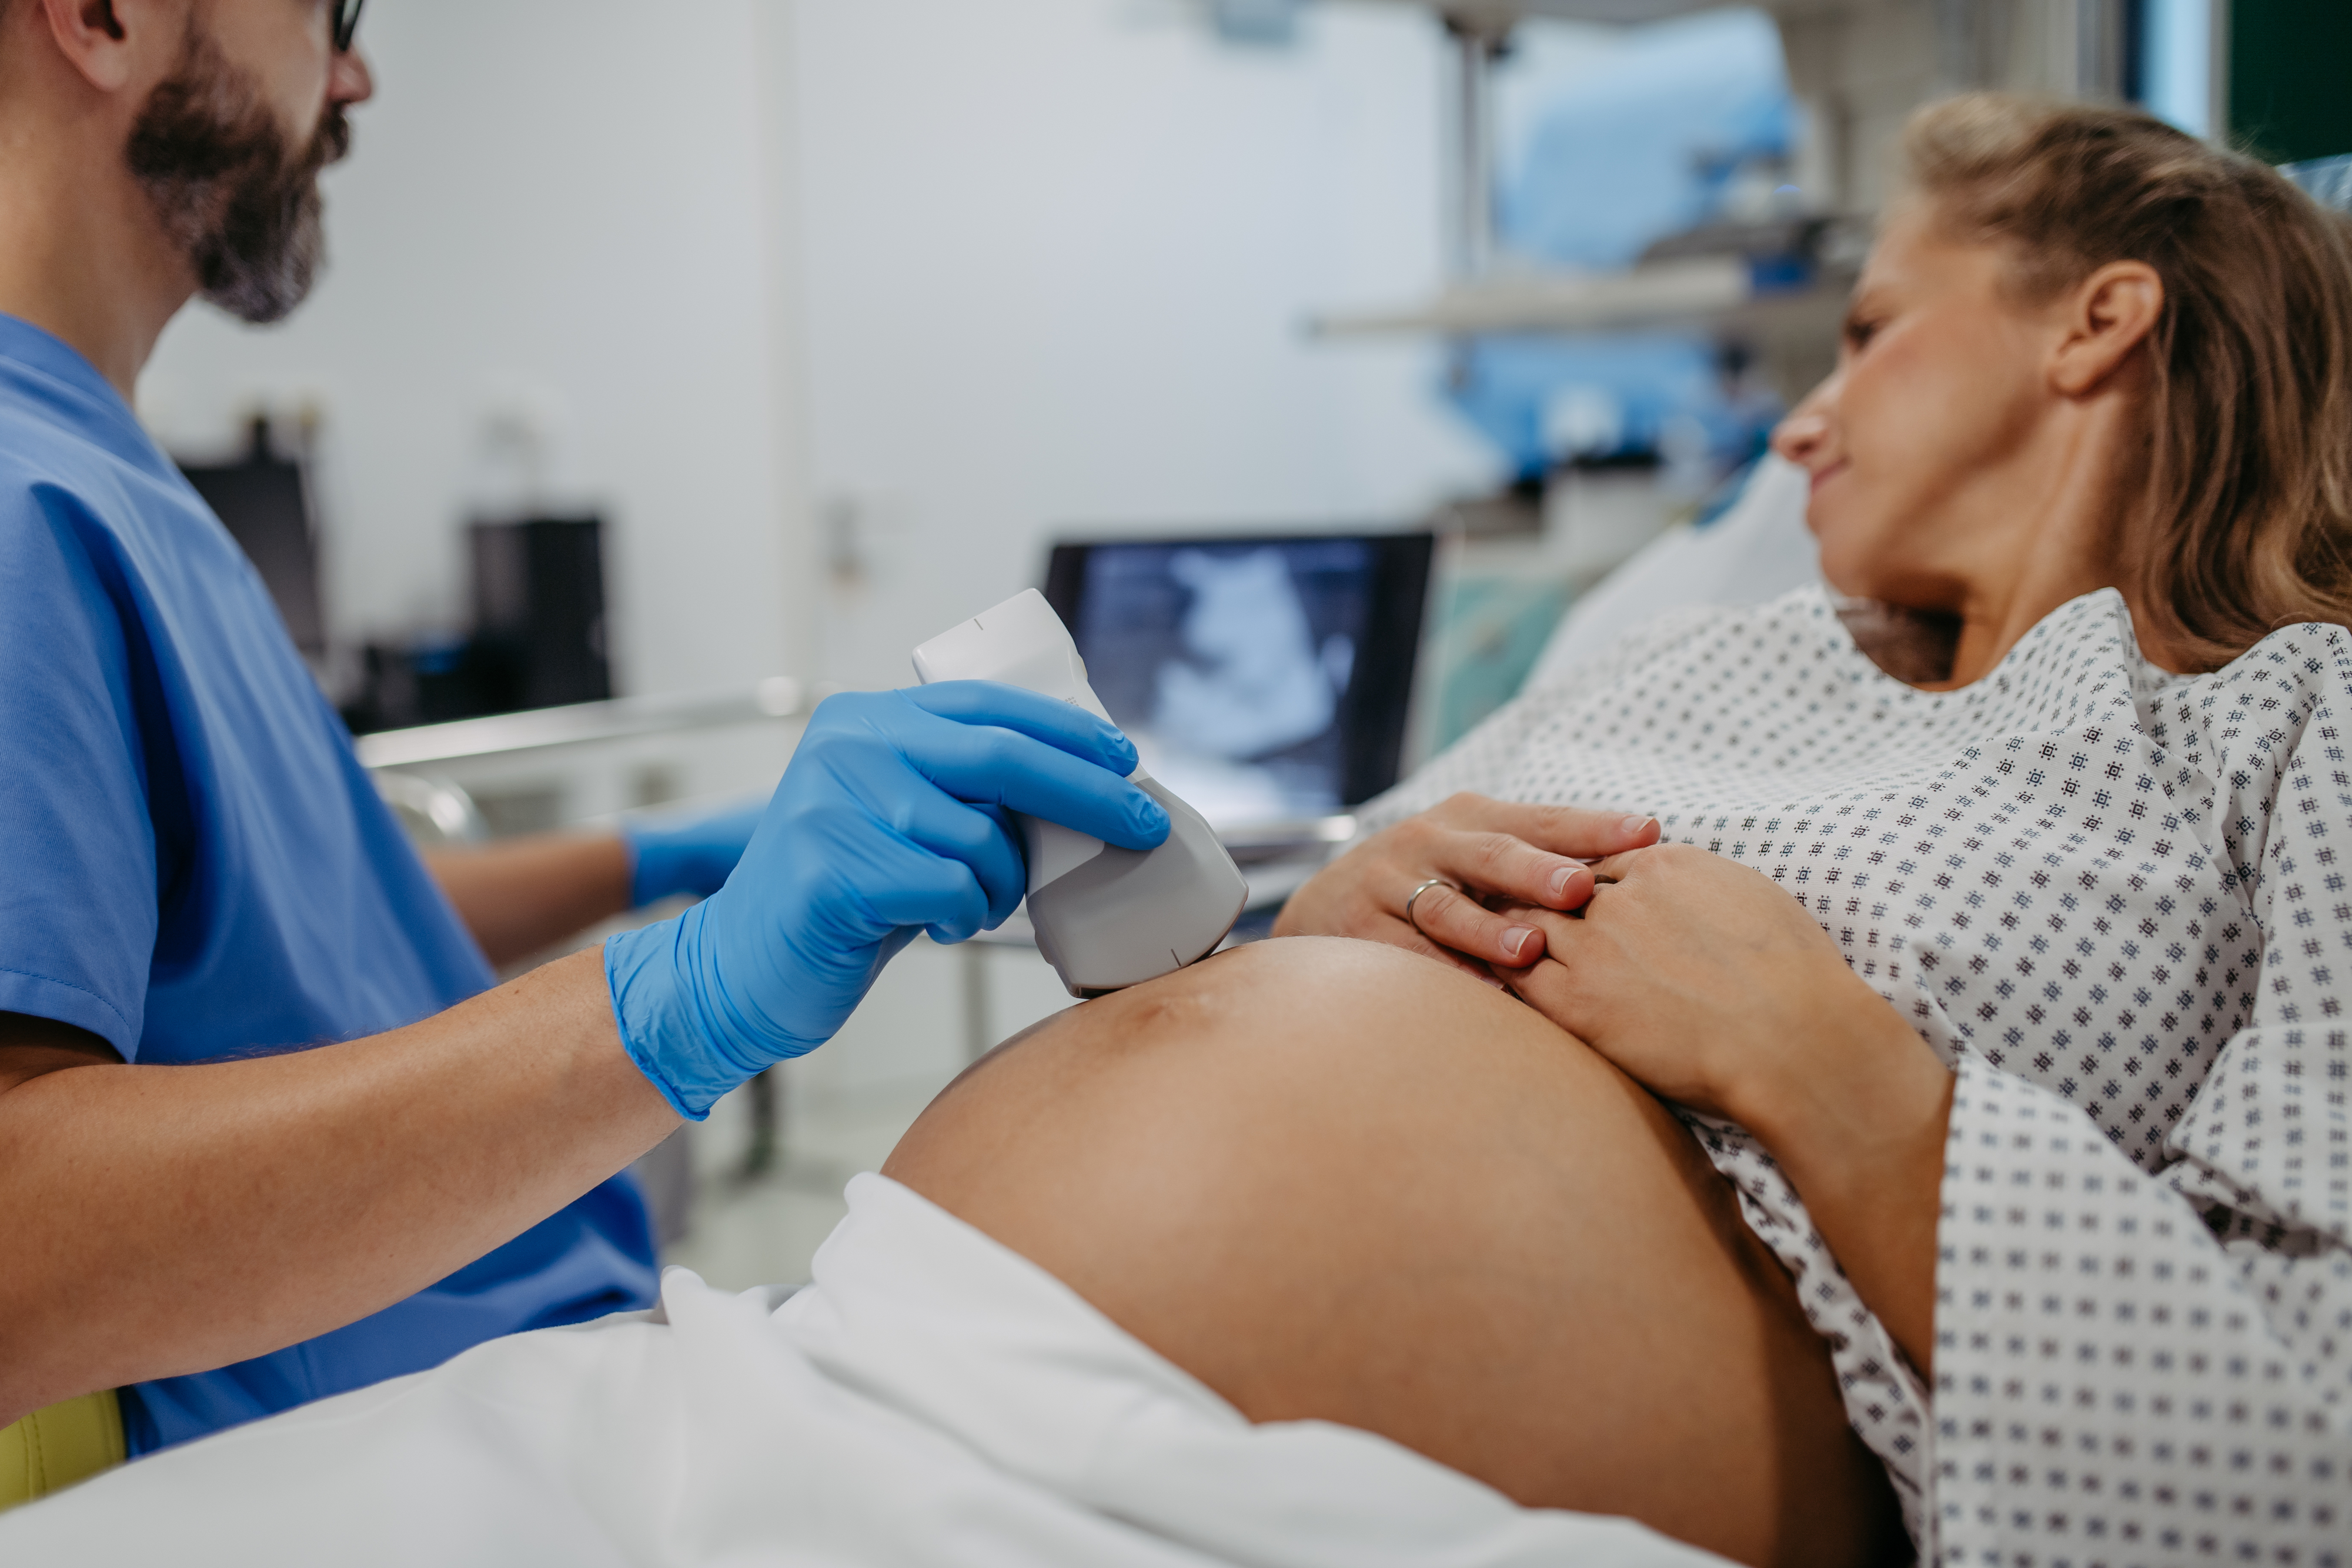 Doctor performing an ultrasound on a pregnant person in a medical setting